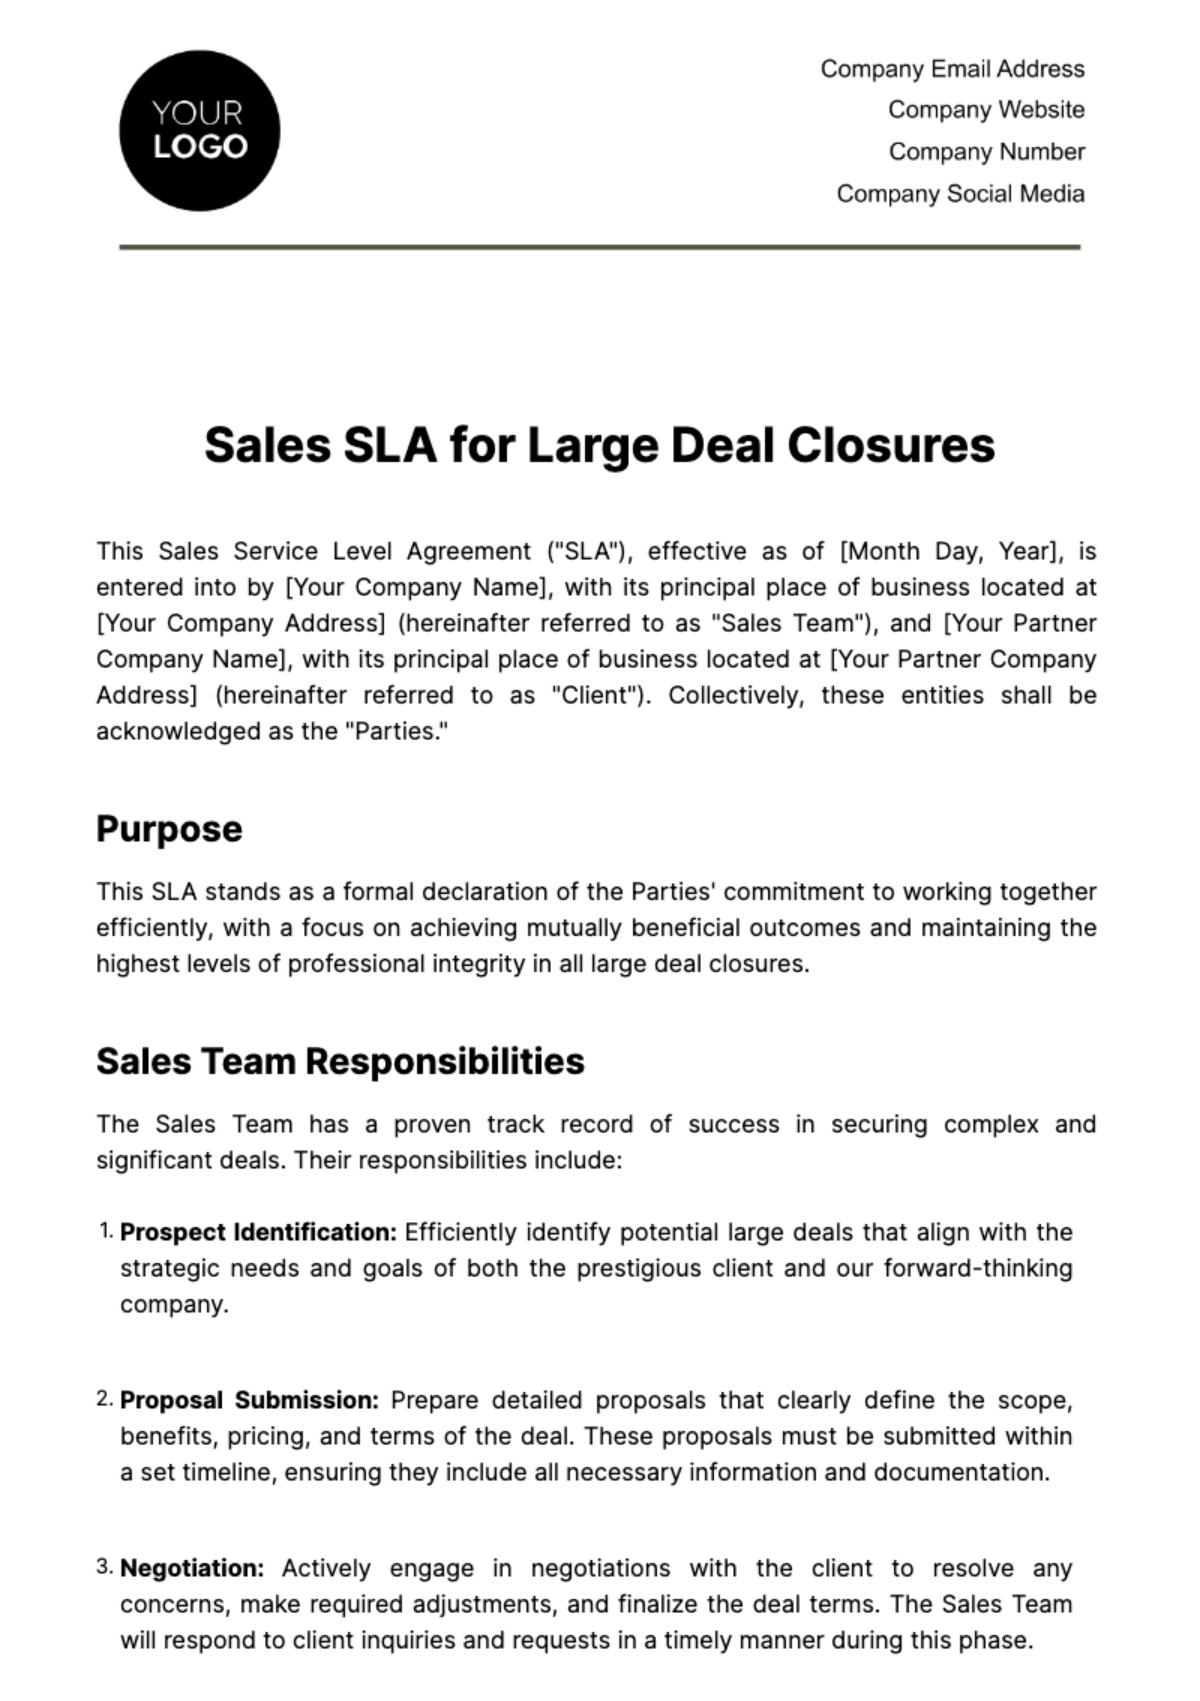 Free Sales SLA for Large Deal Closures Template